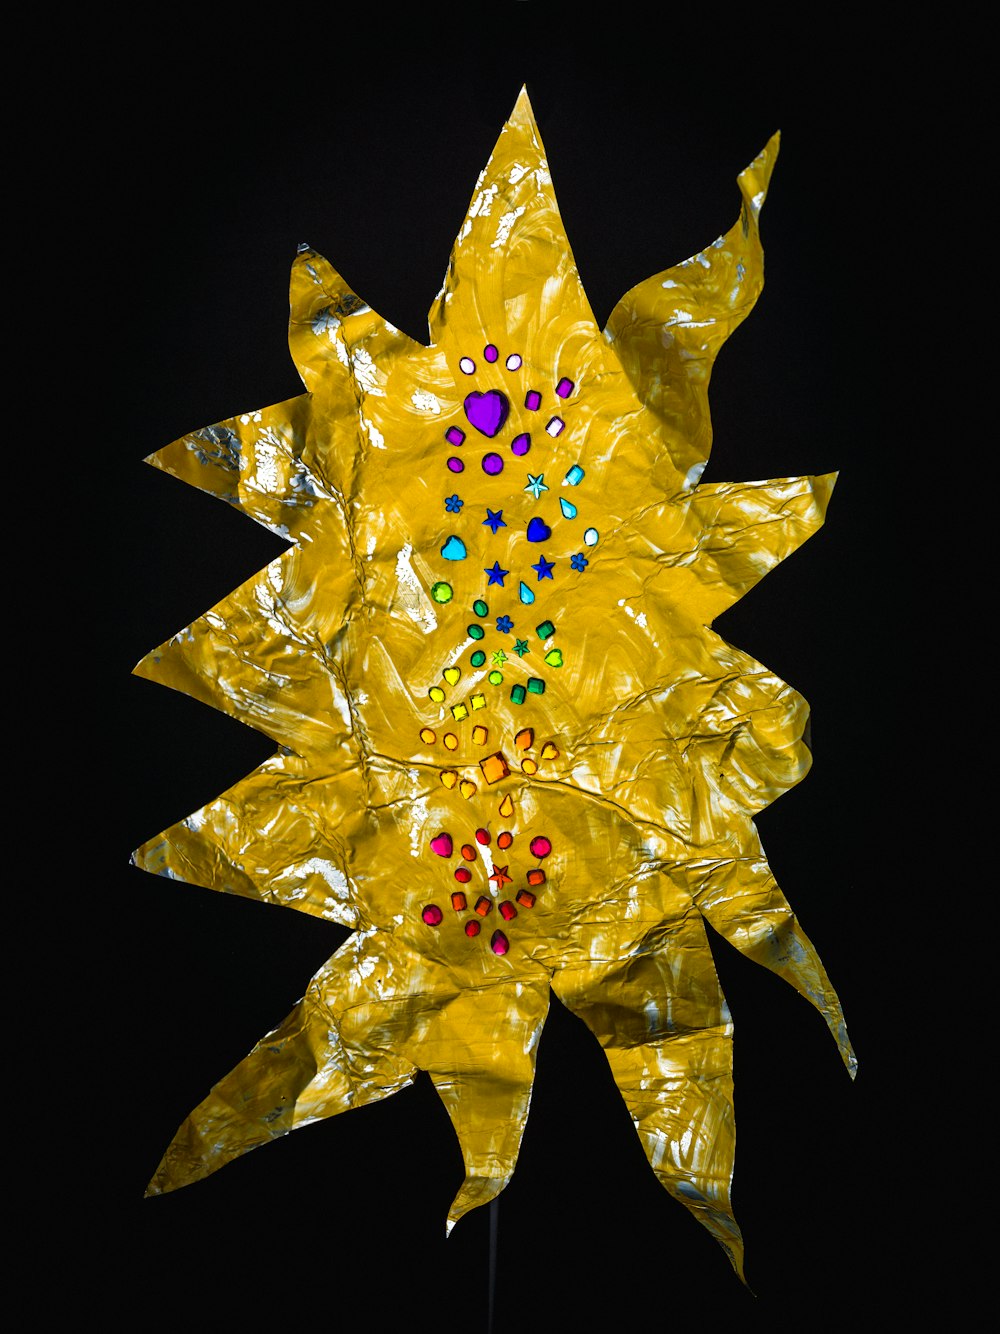 a yellow sunflower made out of plastic wrap